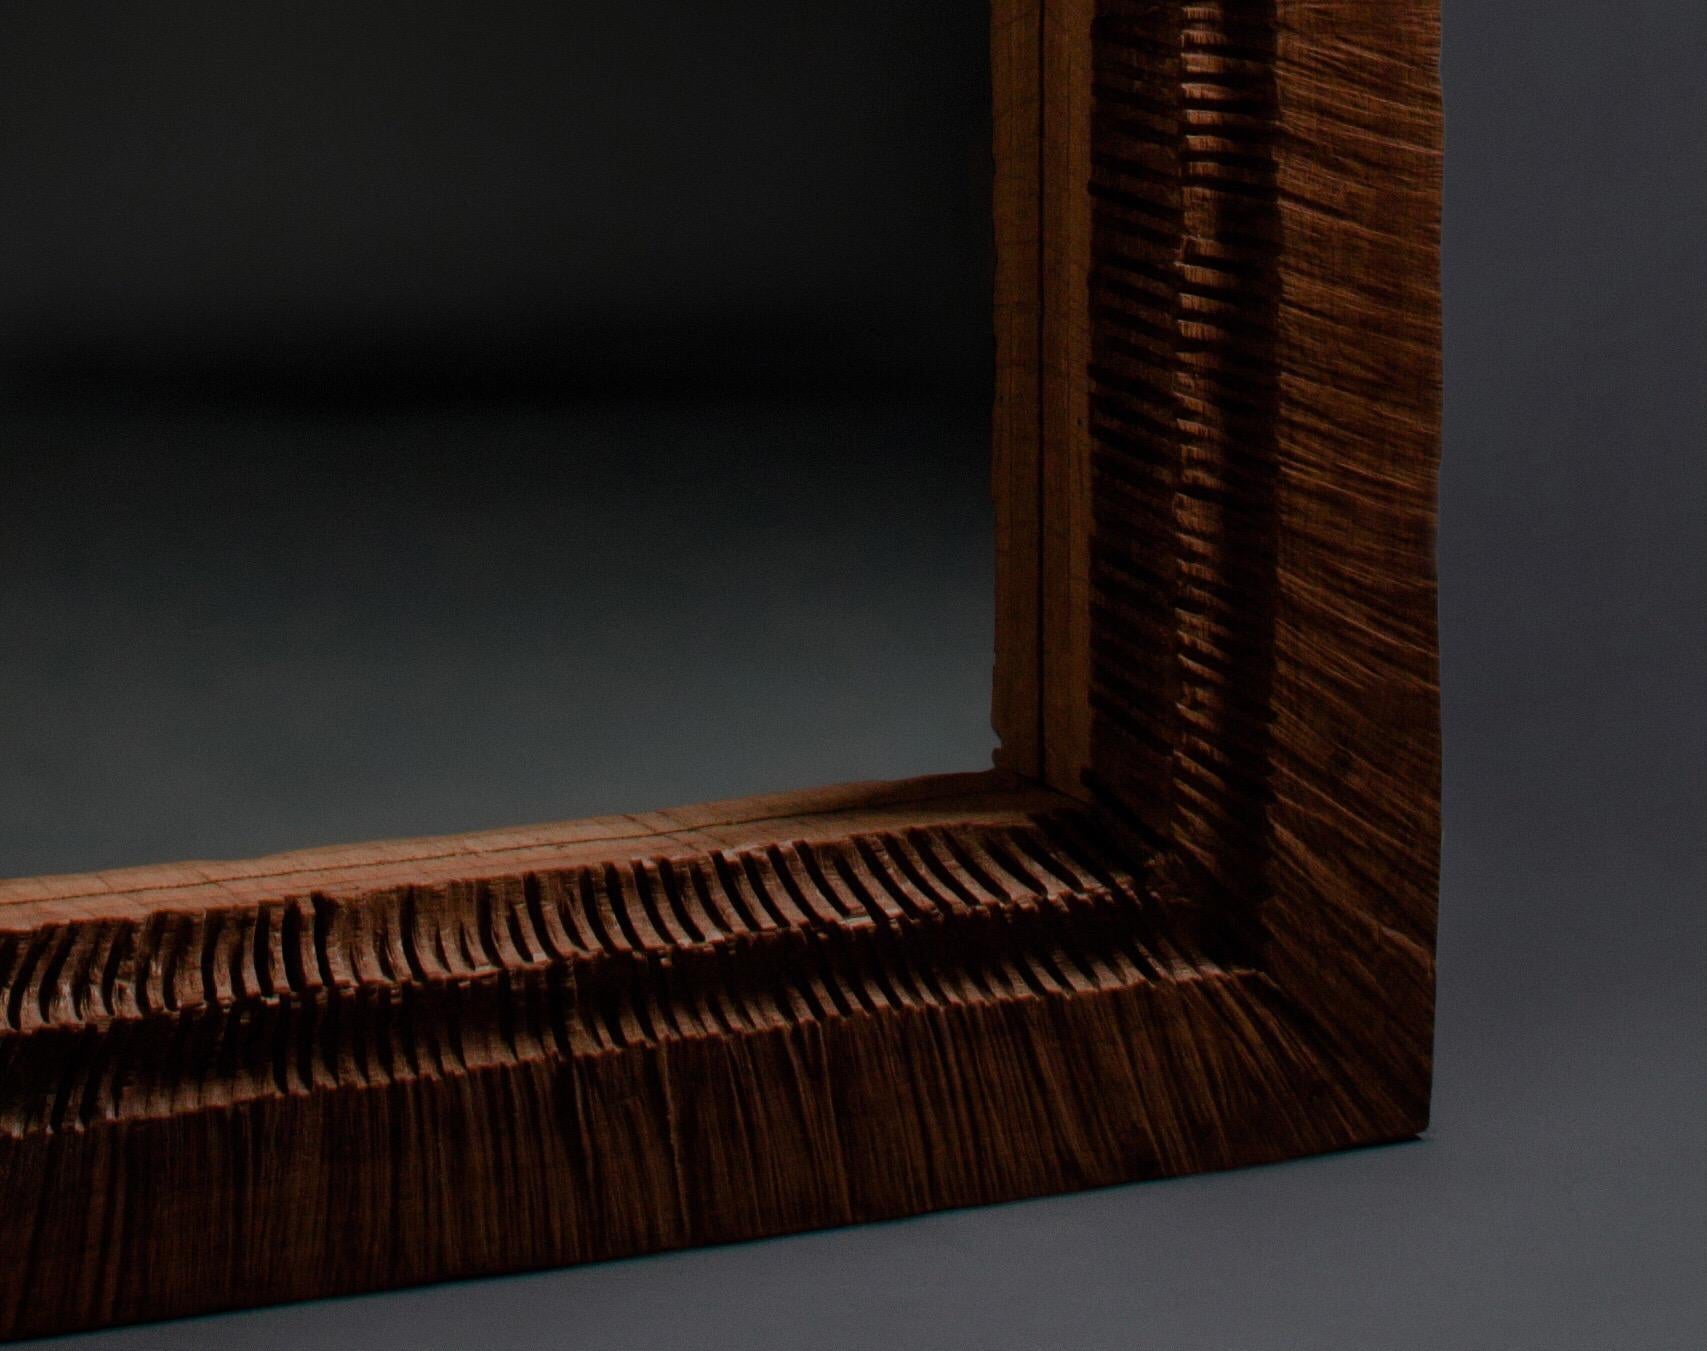 Full length mirror of solid oak (+ linseed oil)
Measures: 189 x 98 x 10 cm

SÓHA design studio conceives and produces furniture design and decorative objects in solid oak in an authentic style. Inspiration to create all these items comes from the